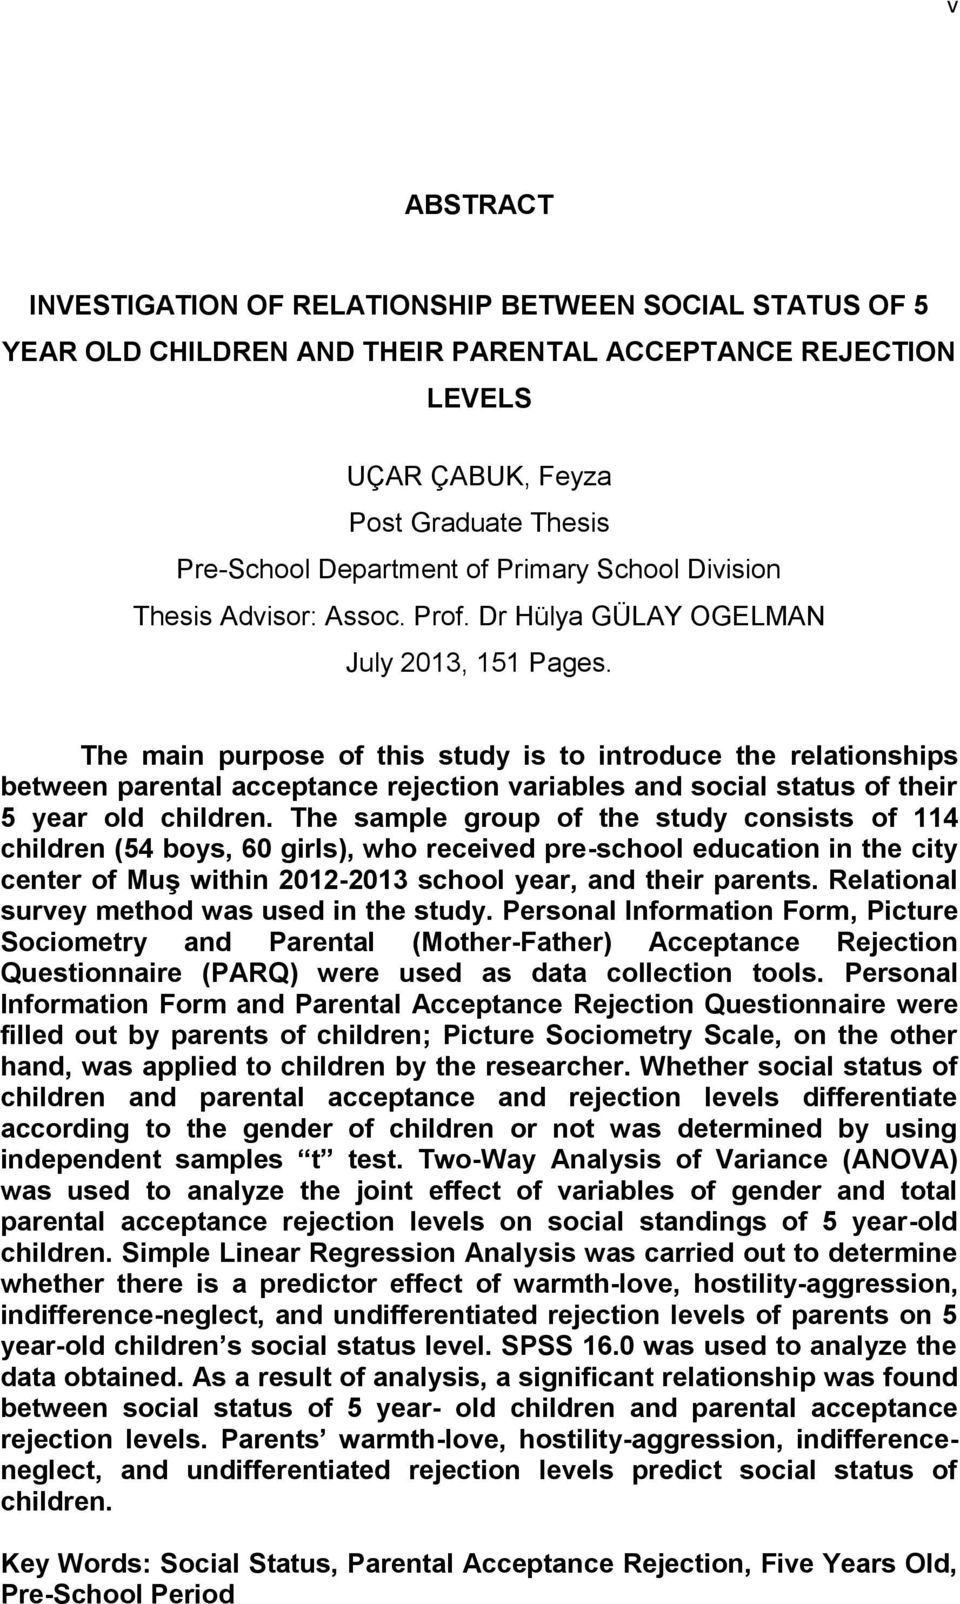 The main purpose of this study is to introduce the relationships between parental acceptance rejection variables and social status of their 5 year old children.